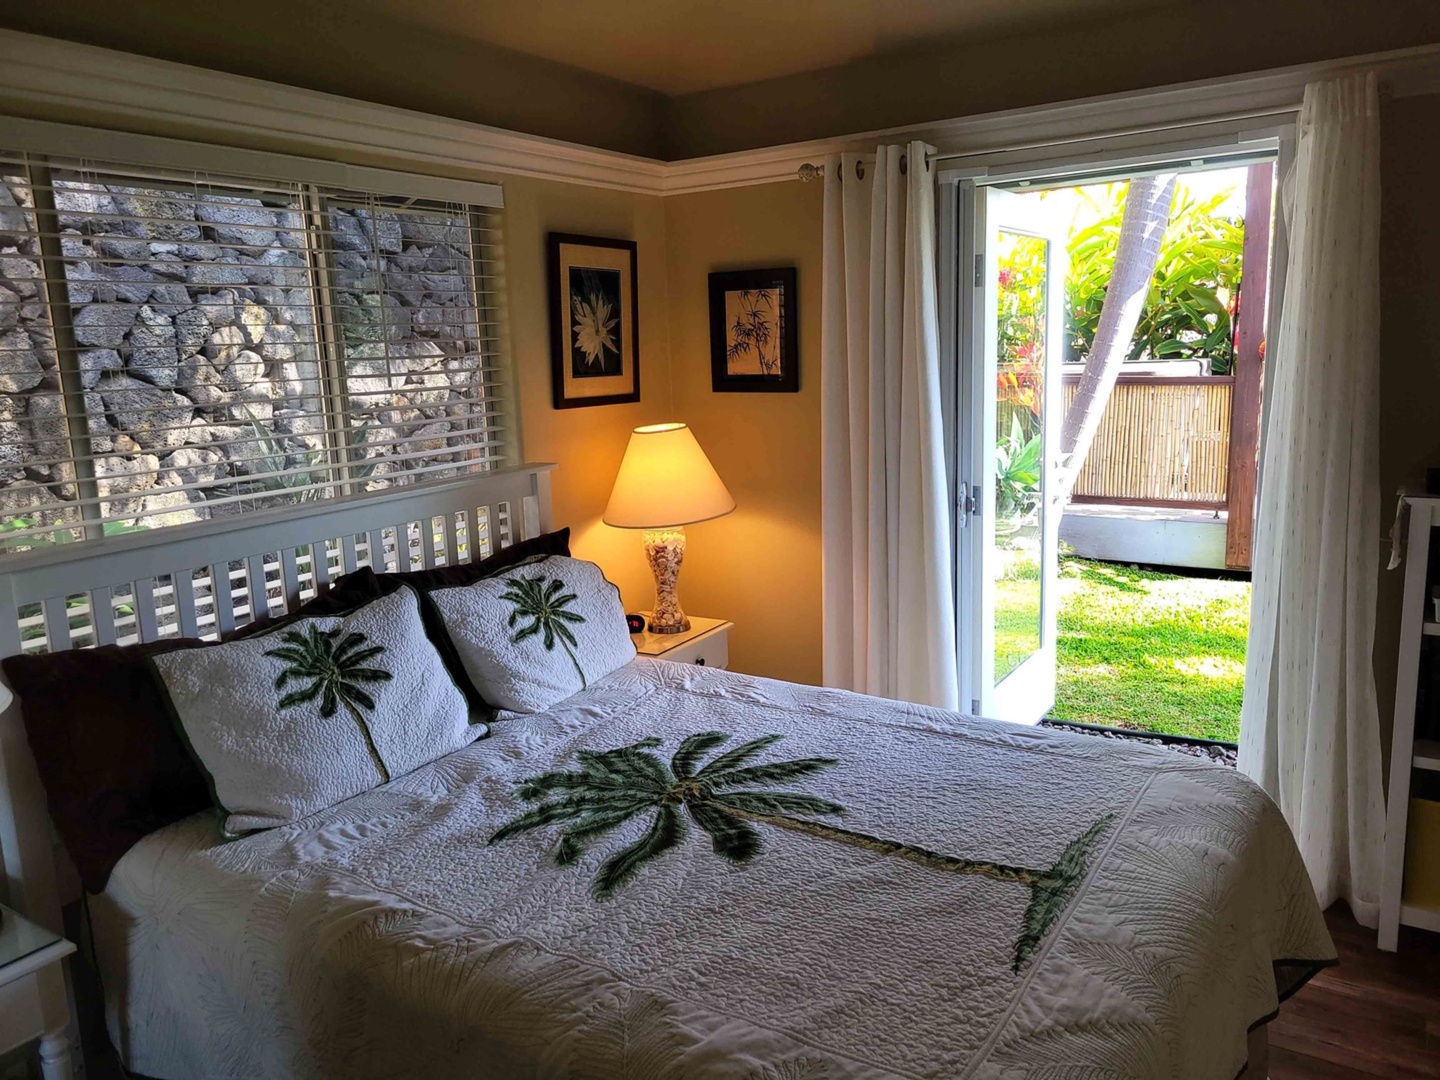 Kailua Kona Vacation Rentals, Hale Alaula - Ocean View - The second bedroom is furnished with a cozy queen-size bed, an overhead fan, 32-inch wall-mounted Smart T.V. with a Blu-Ray player, and a large closet.